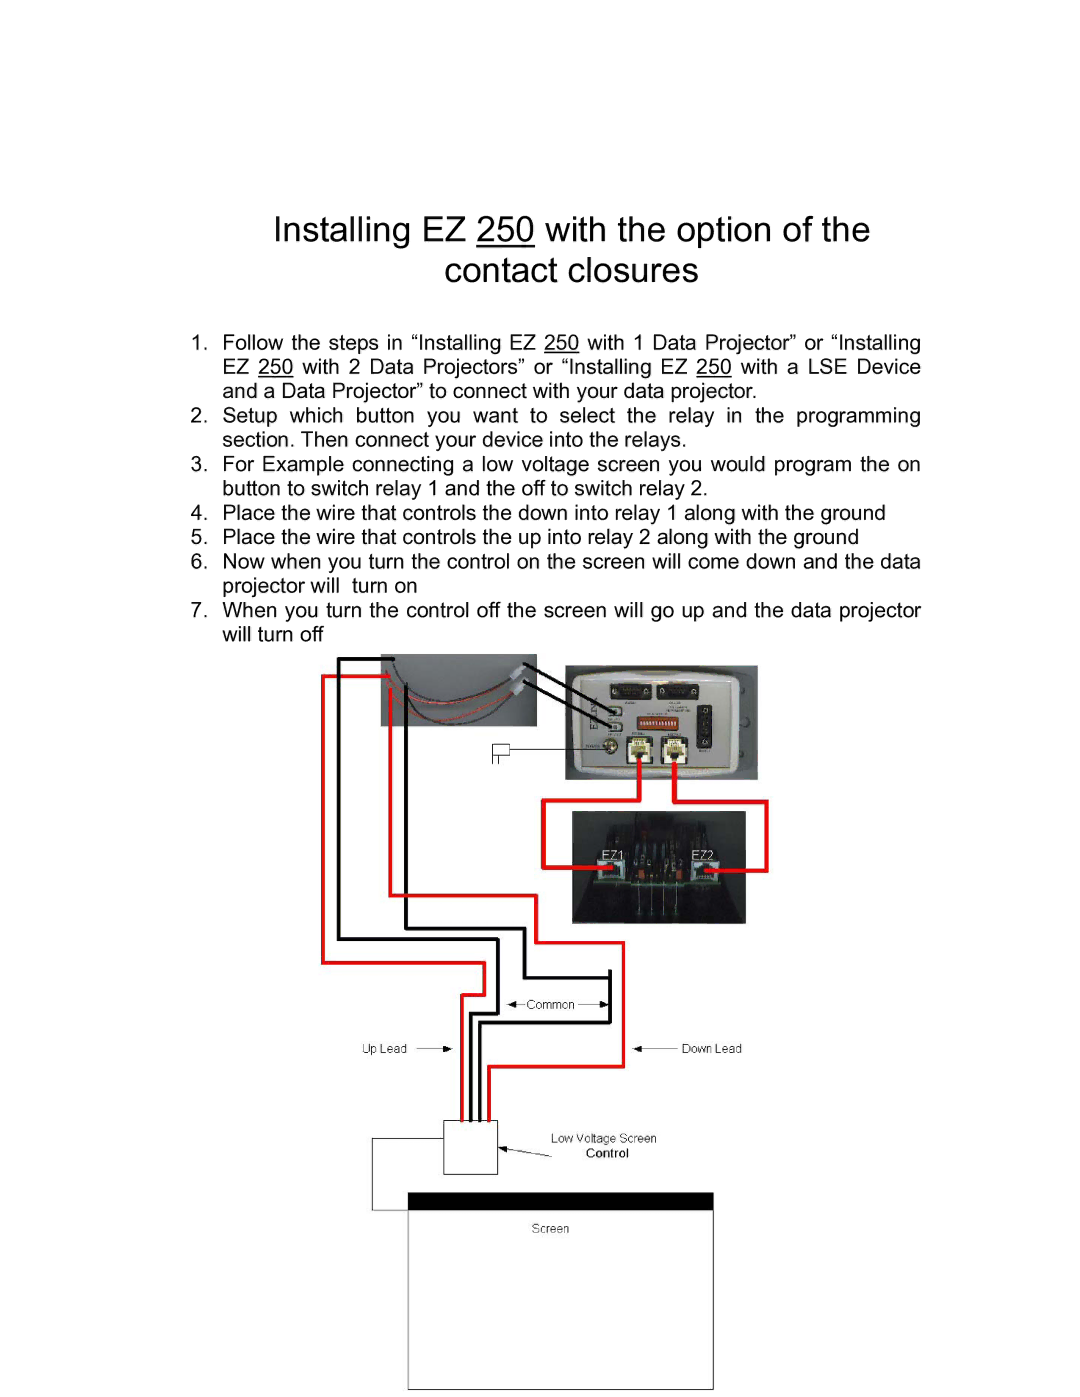 Eiki owner manual Installing EZ 250 with the option Contact closures 